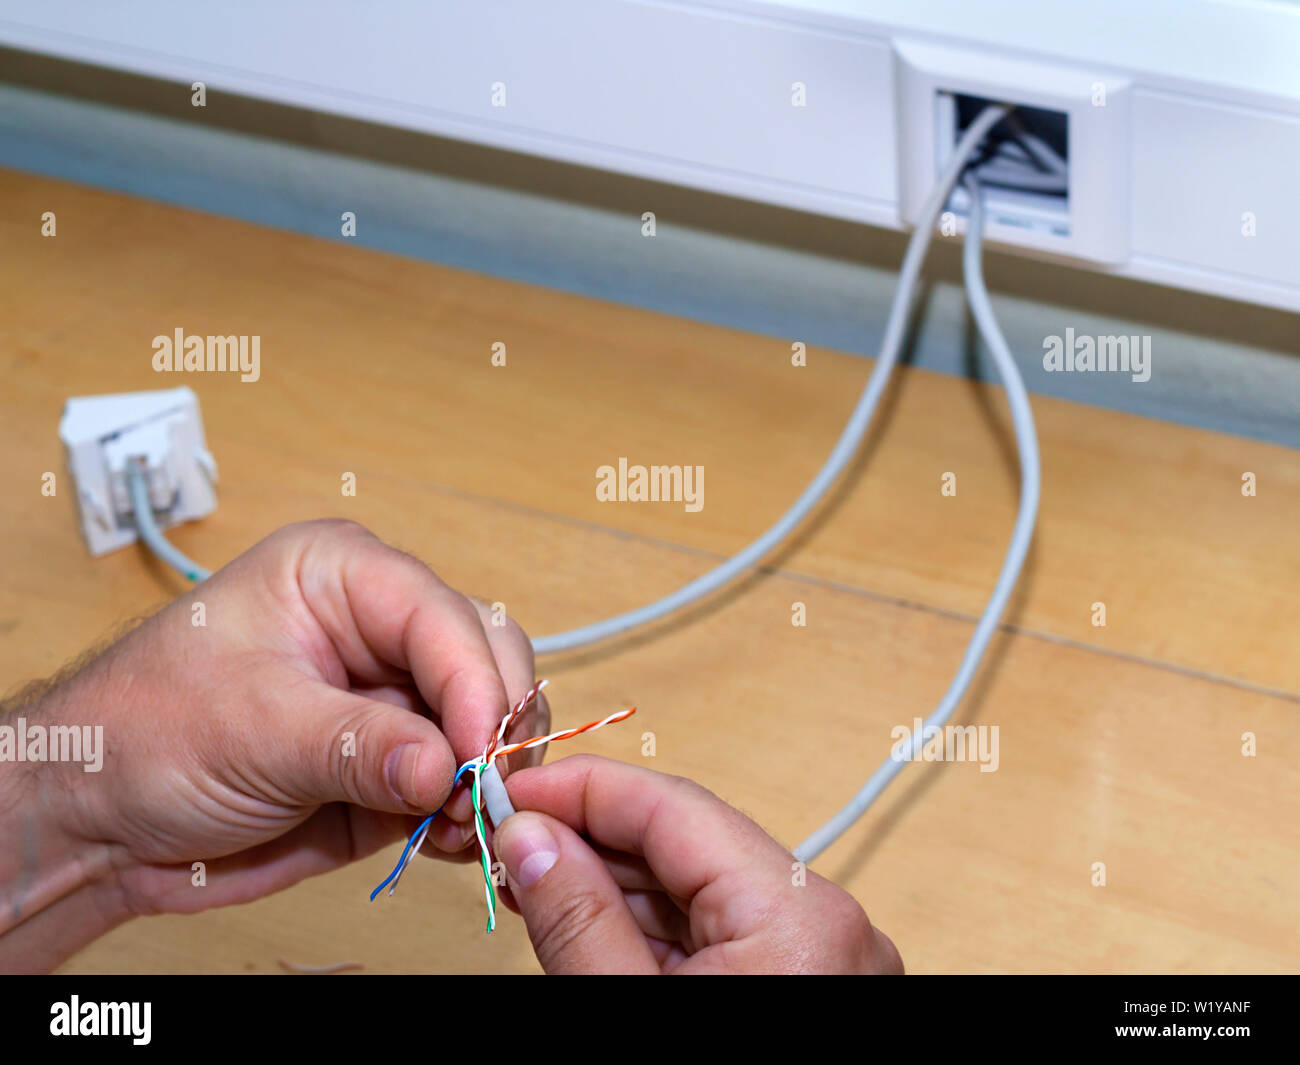 installation of Internet sockets in the cable channel Stock Photo